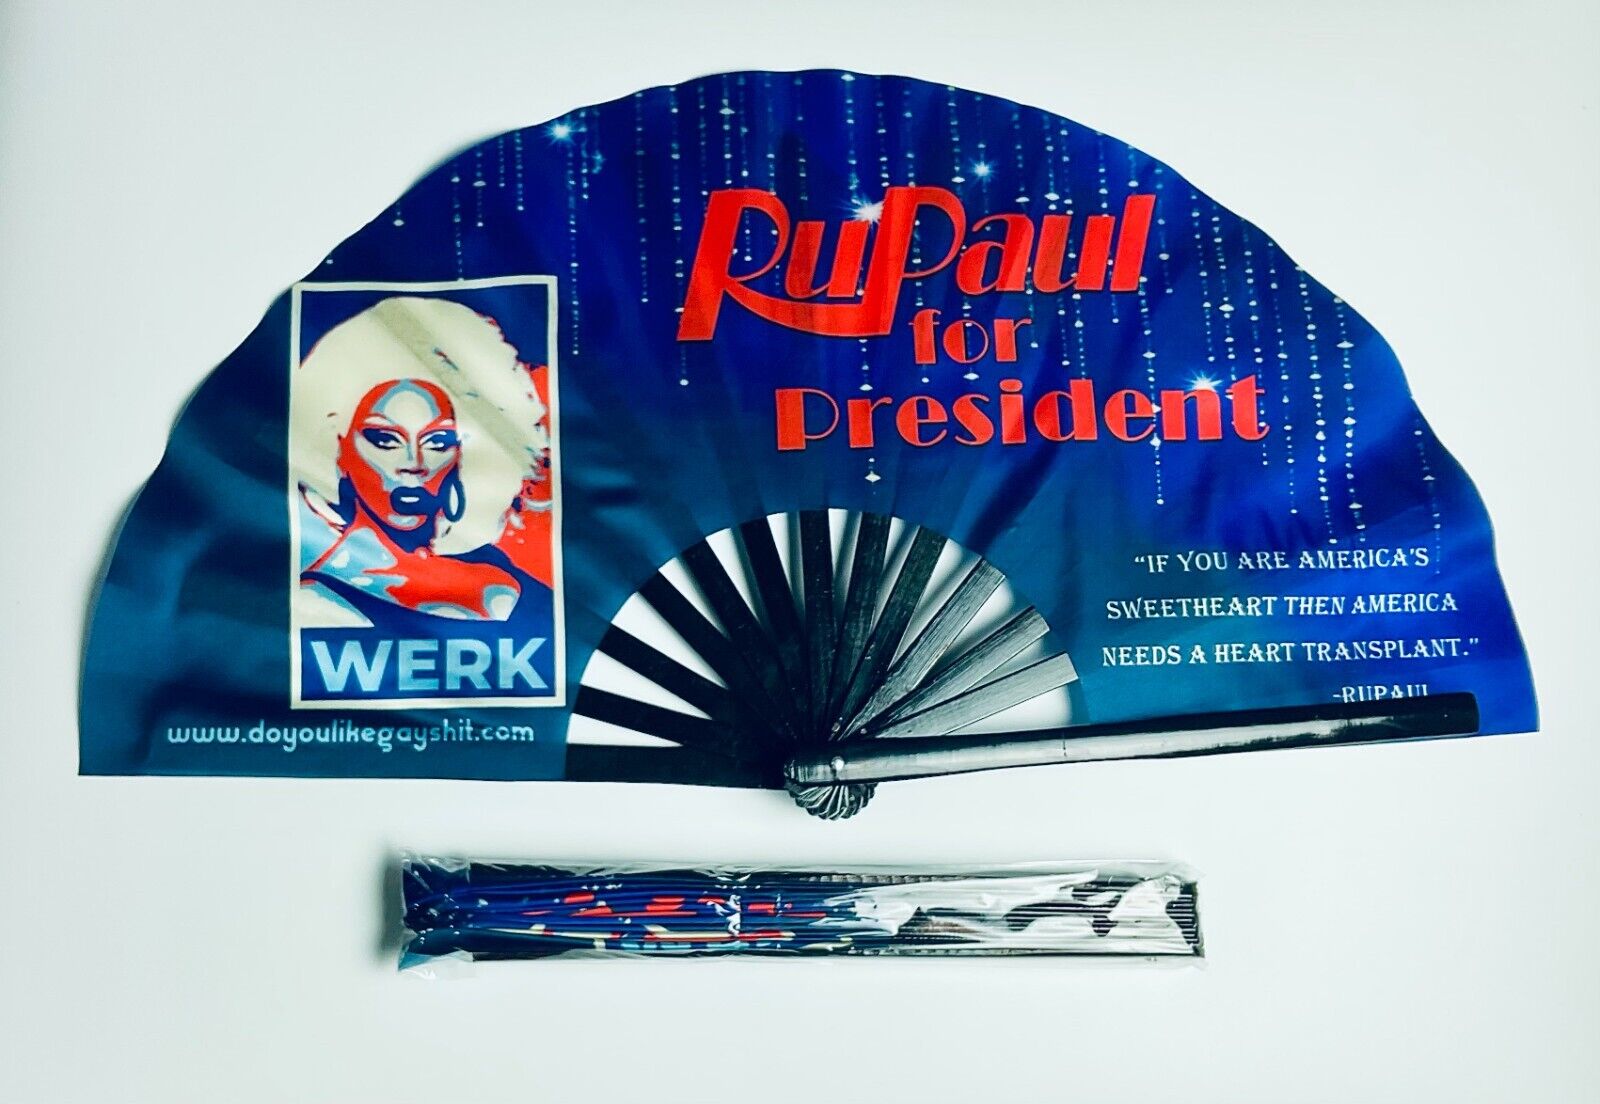 Rupaul For President 26" Political Extra Large Folding Clack Gay Pride Fan Rave Do You Like Gay Shit?